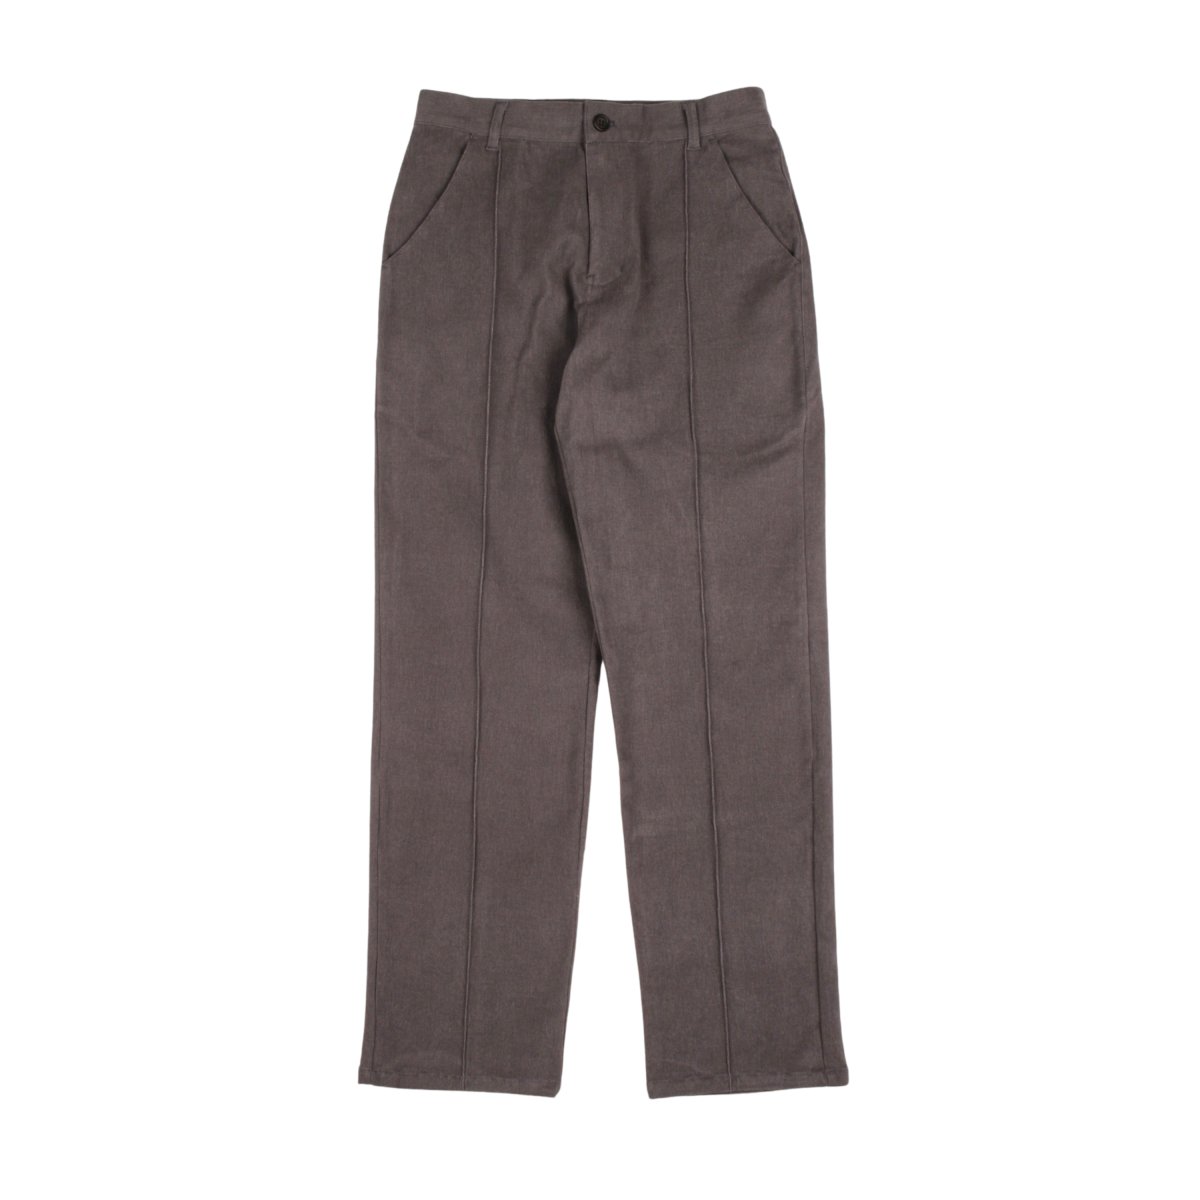  STITCHED CREASE WORK PANT